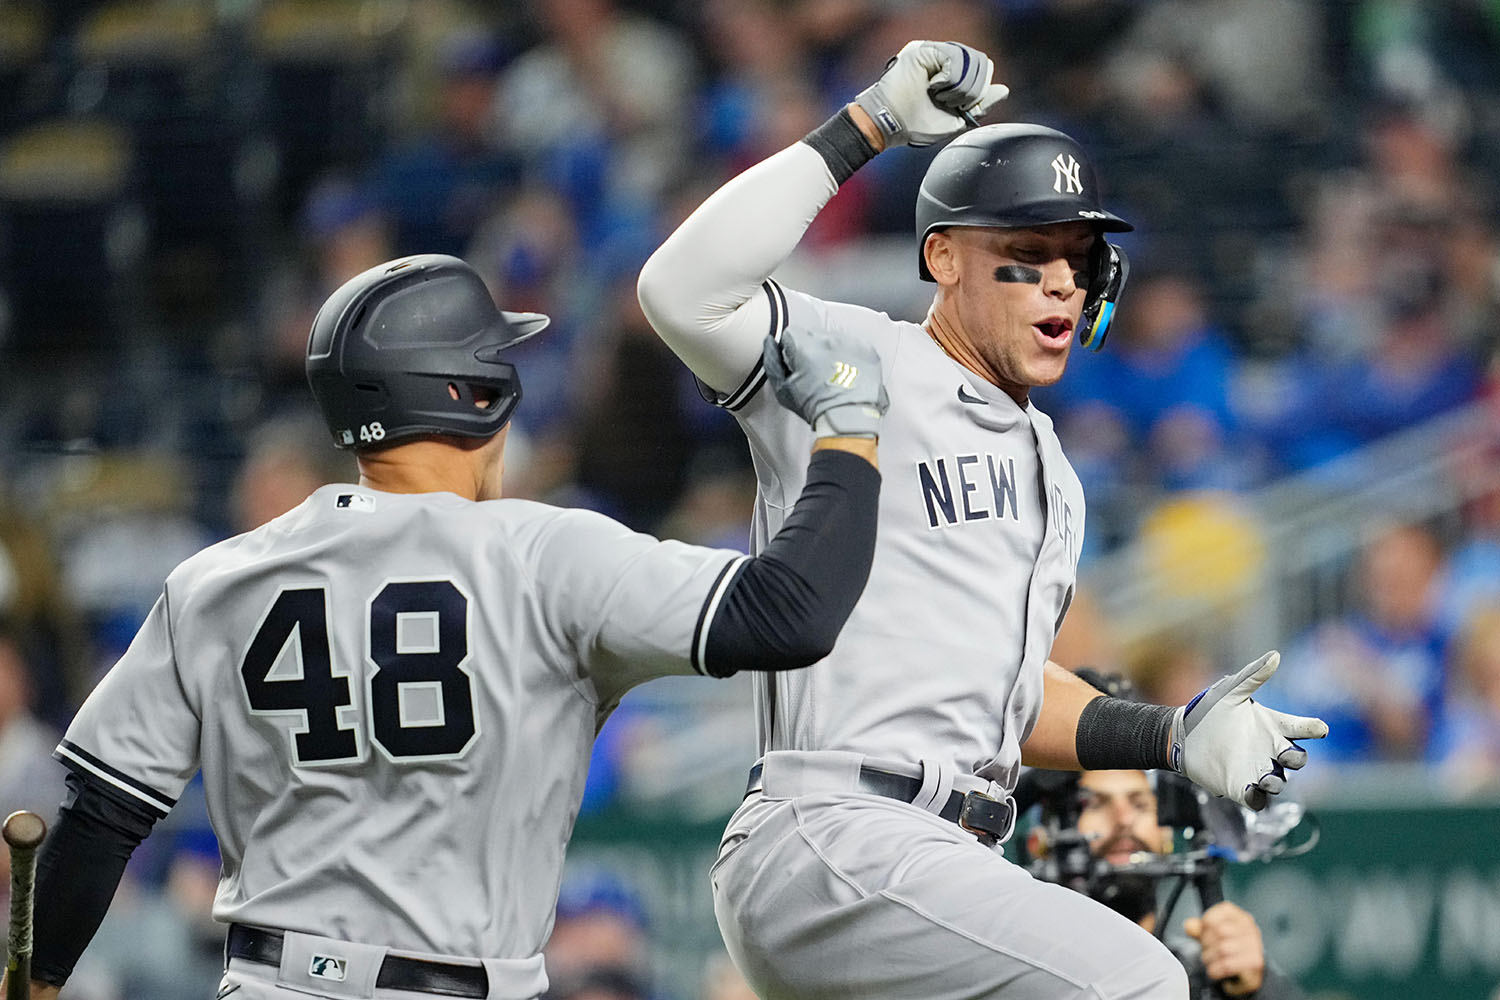 YES Network to Launch Direct-to-Consumer Yankees Service